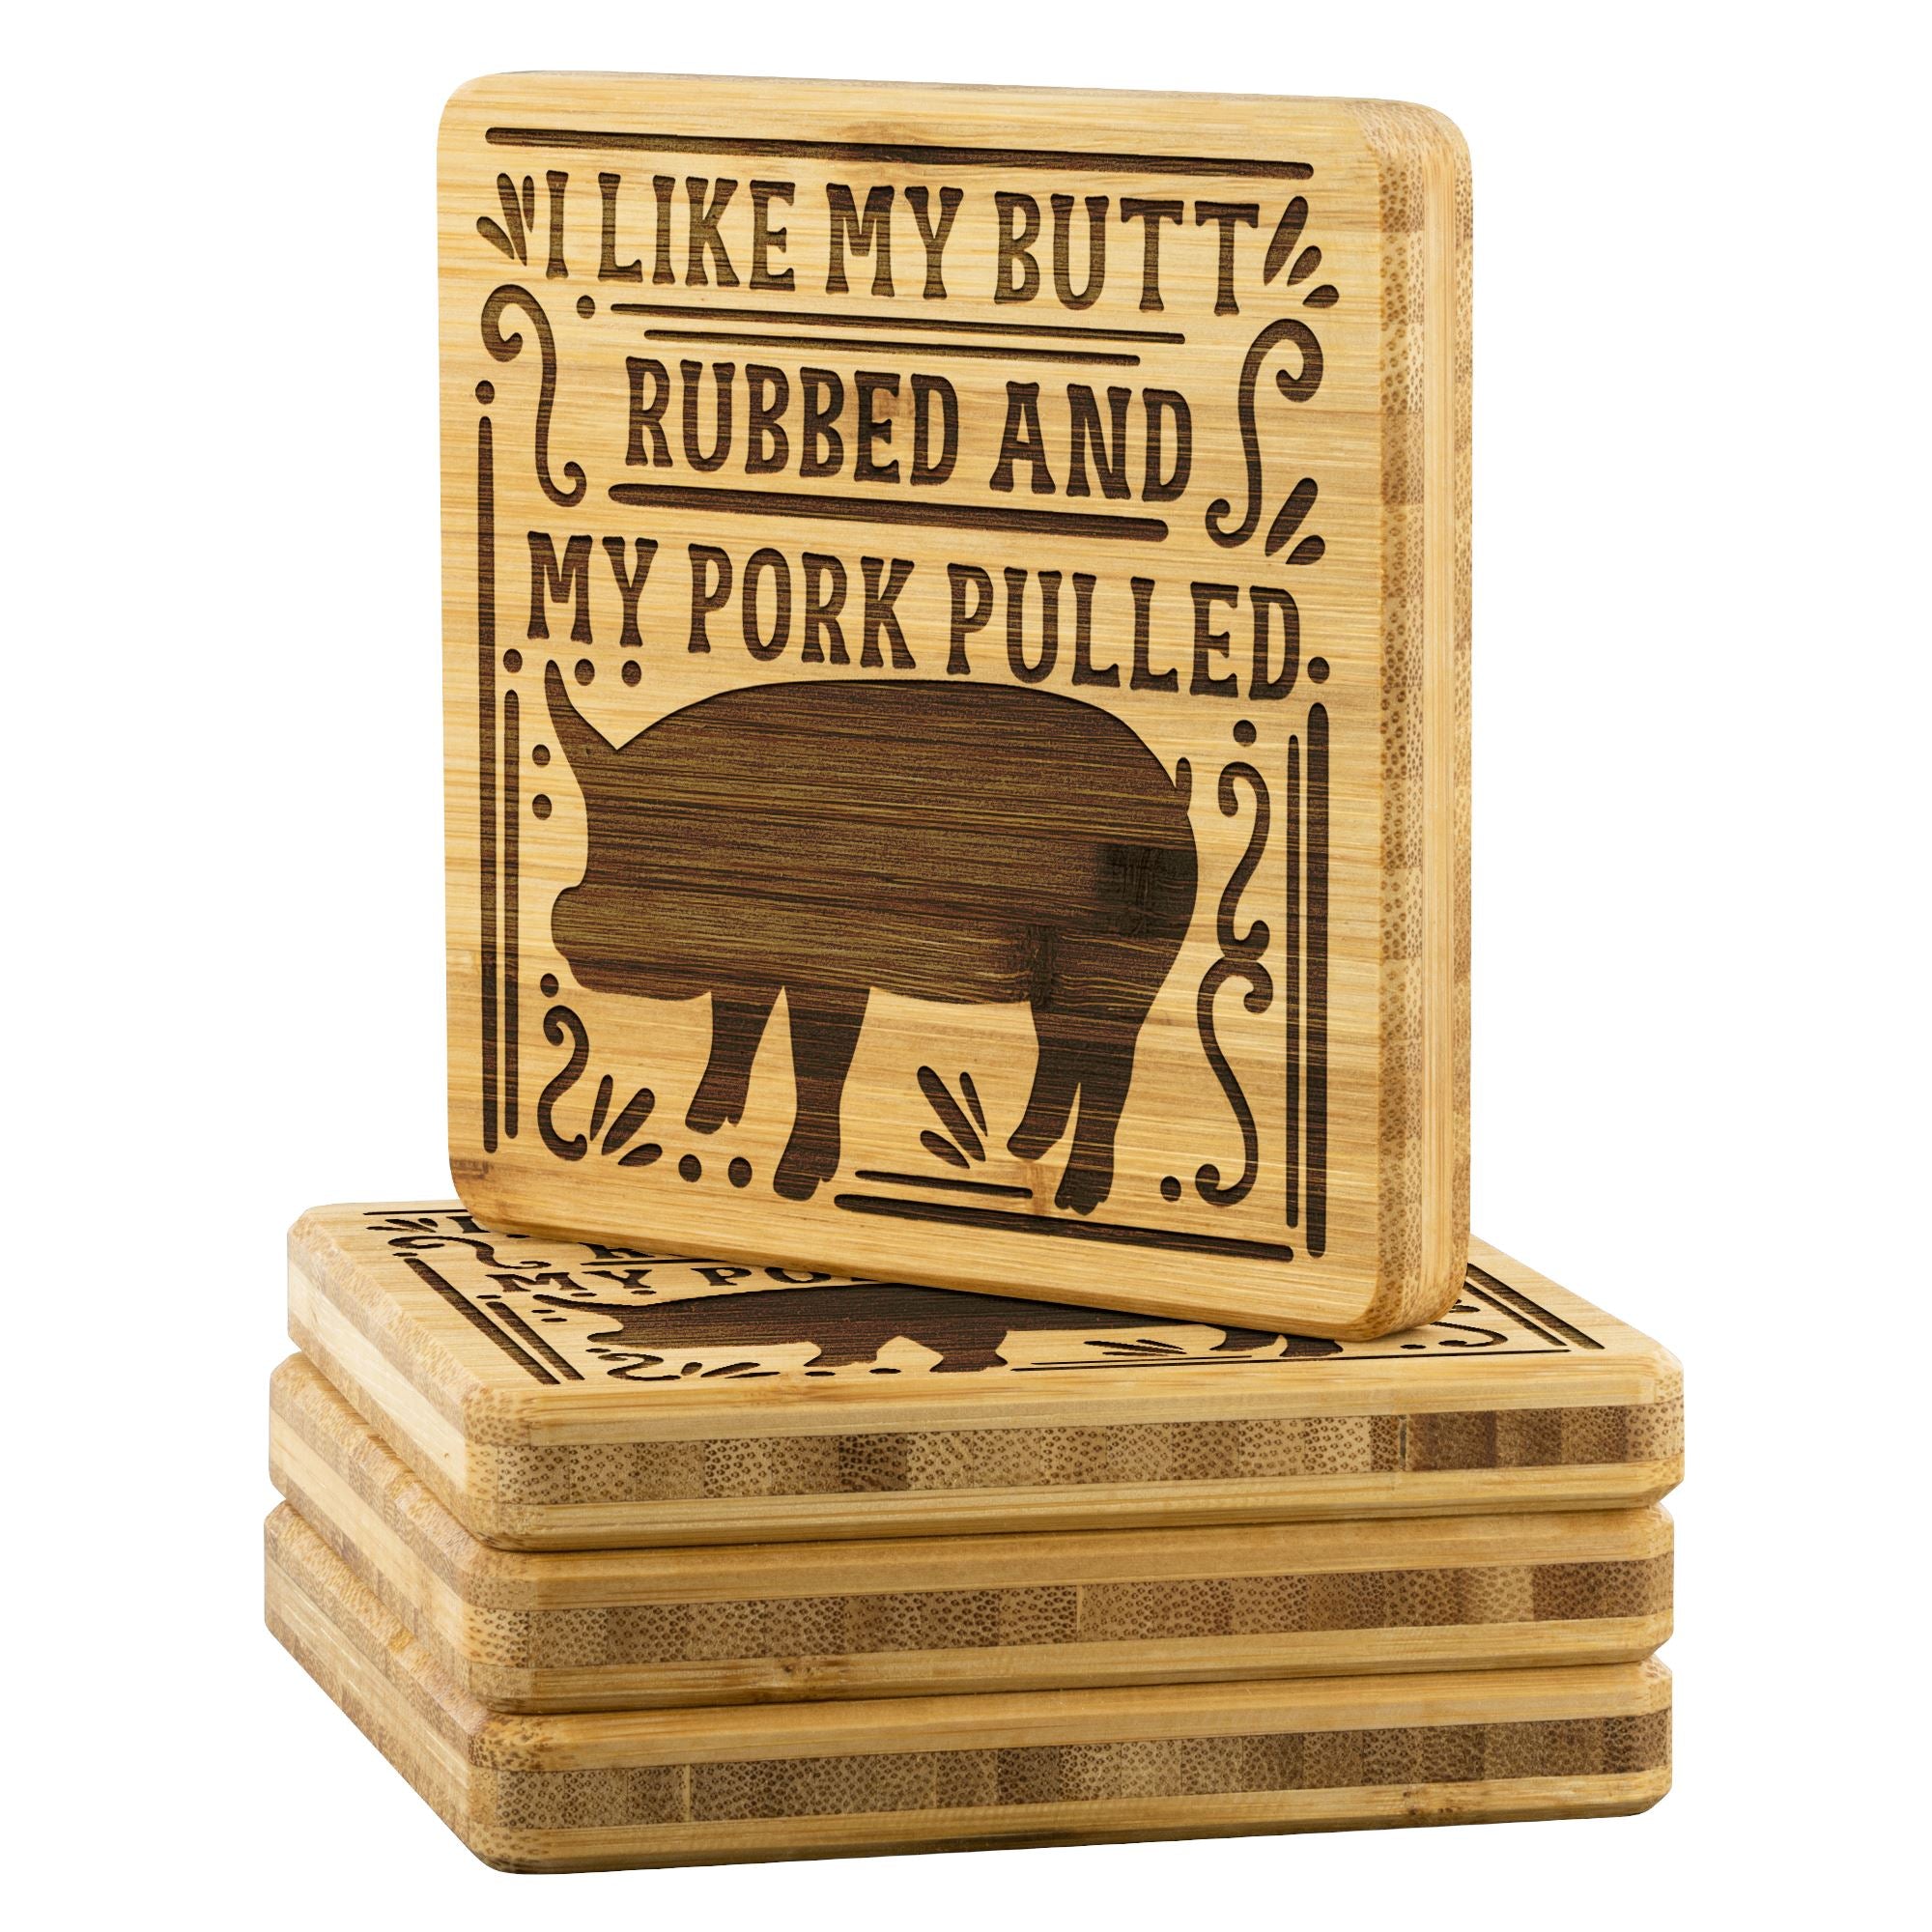 I Like My Butt Rubbed And Pork Pulled Bamboo Coaster - White Background